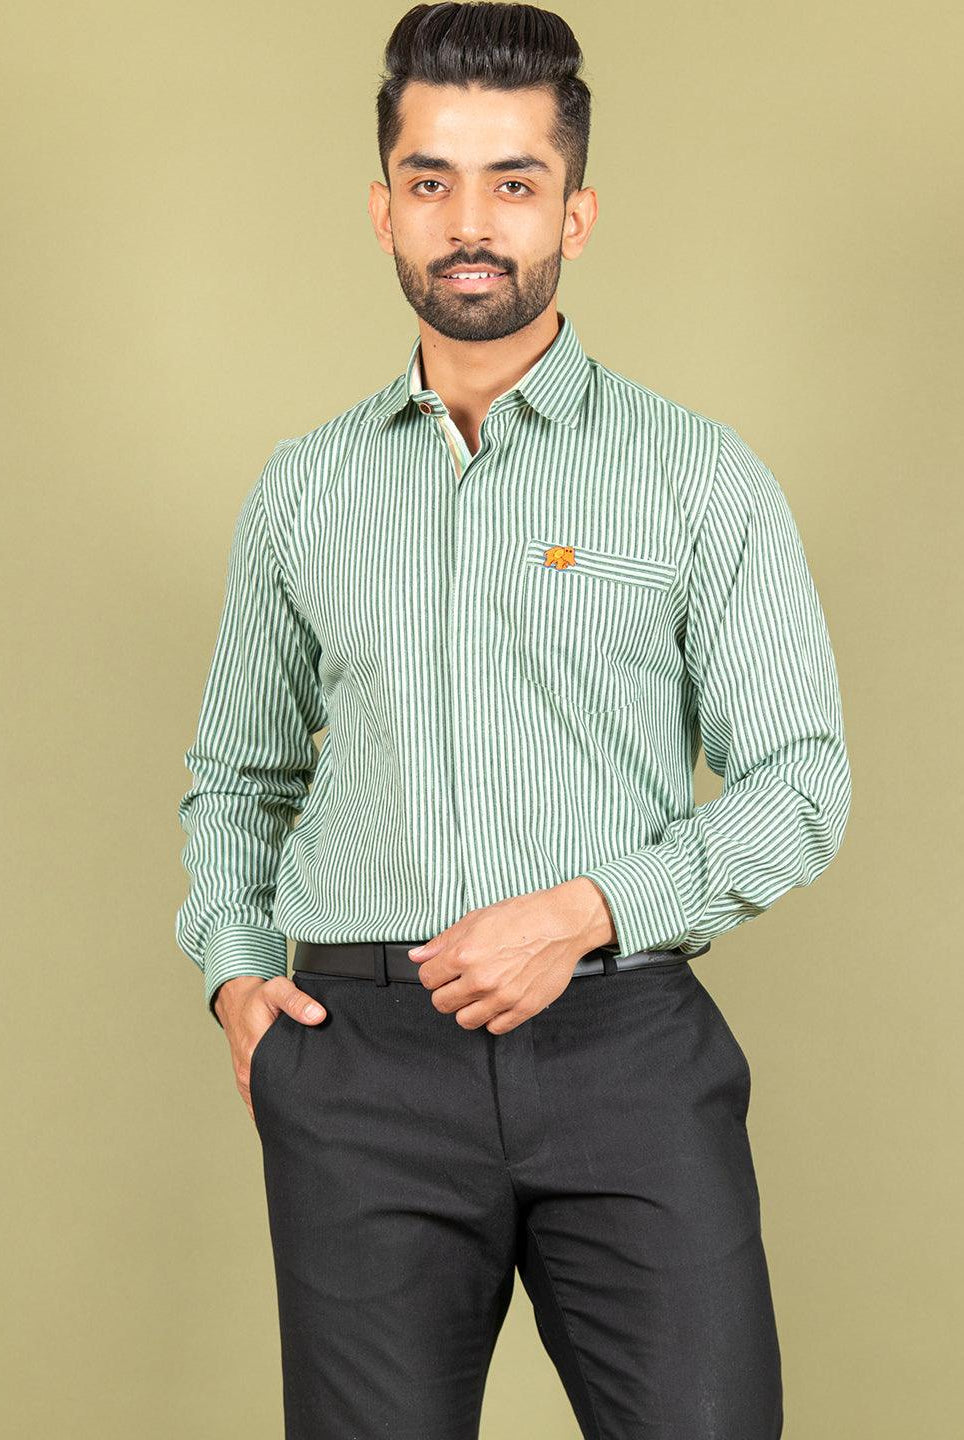 Green Stripes Shirt With Embroided Elephant - Tistabene